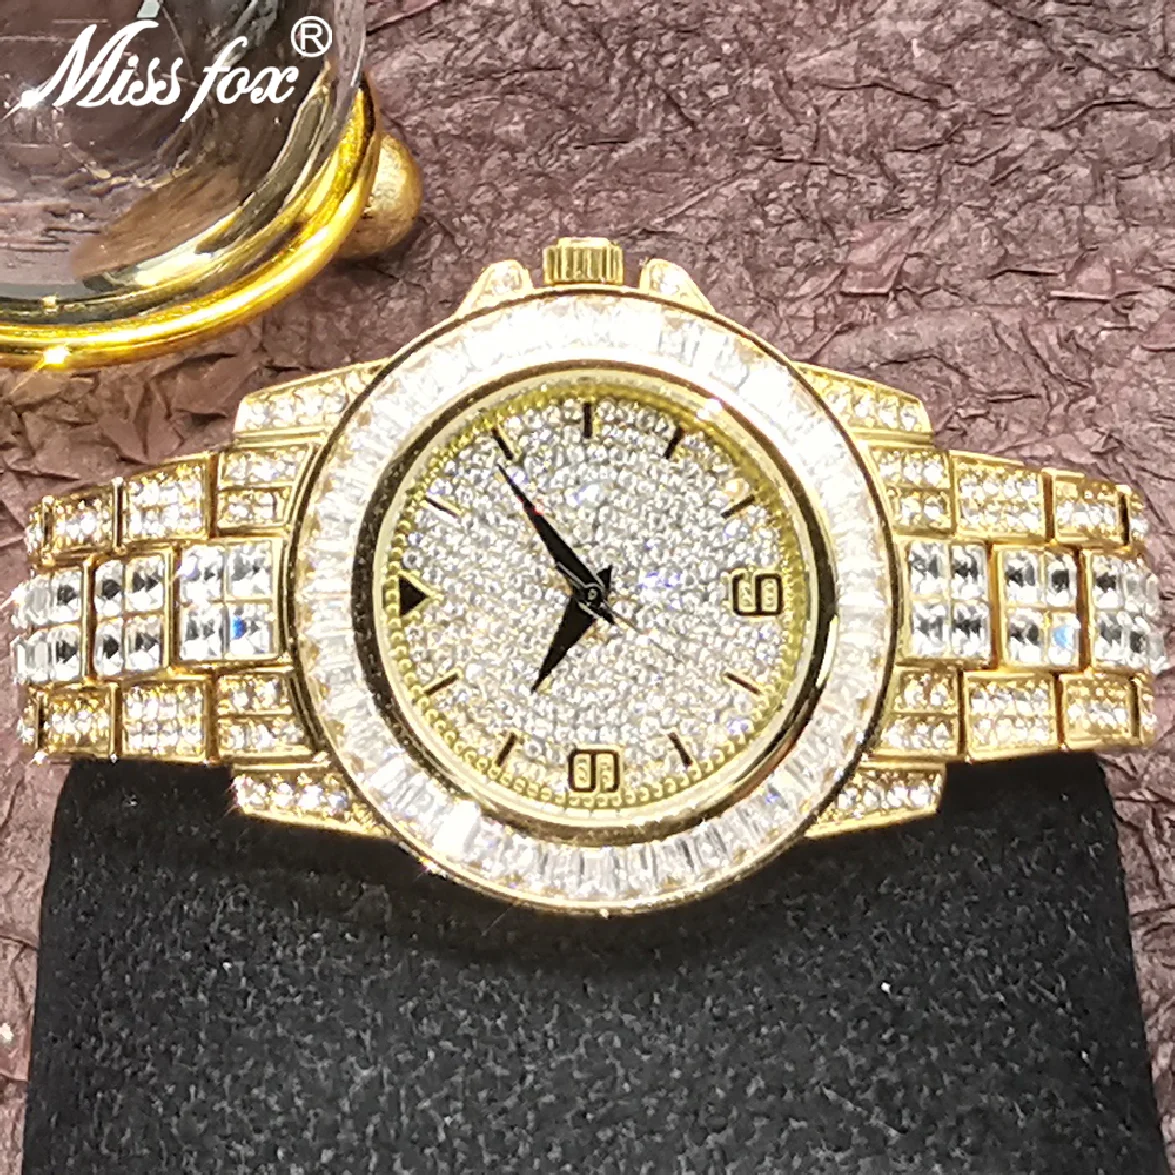 

New Brand Gold Mens Watches Iced Out Full Moissanite Luxury Watch Automatic Date Fashion High Quality Clocks Male Free Shipping